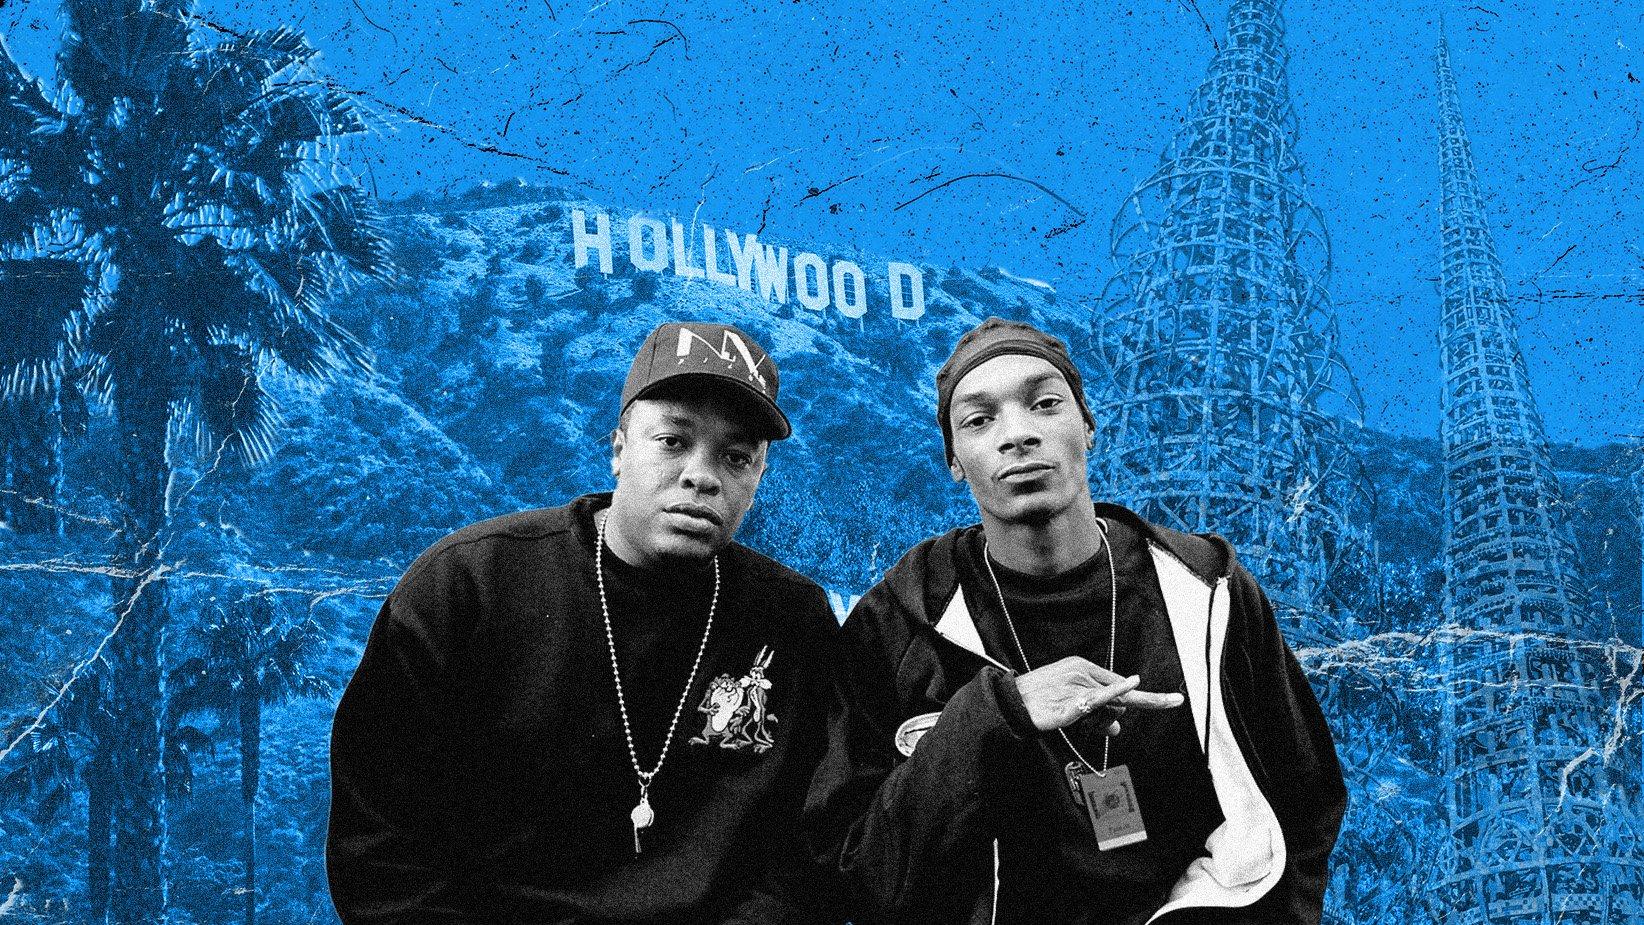 N.W.A Are 'Straight Outta Compton': For The Record | GRAMMY.com